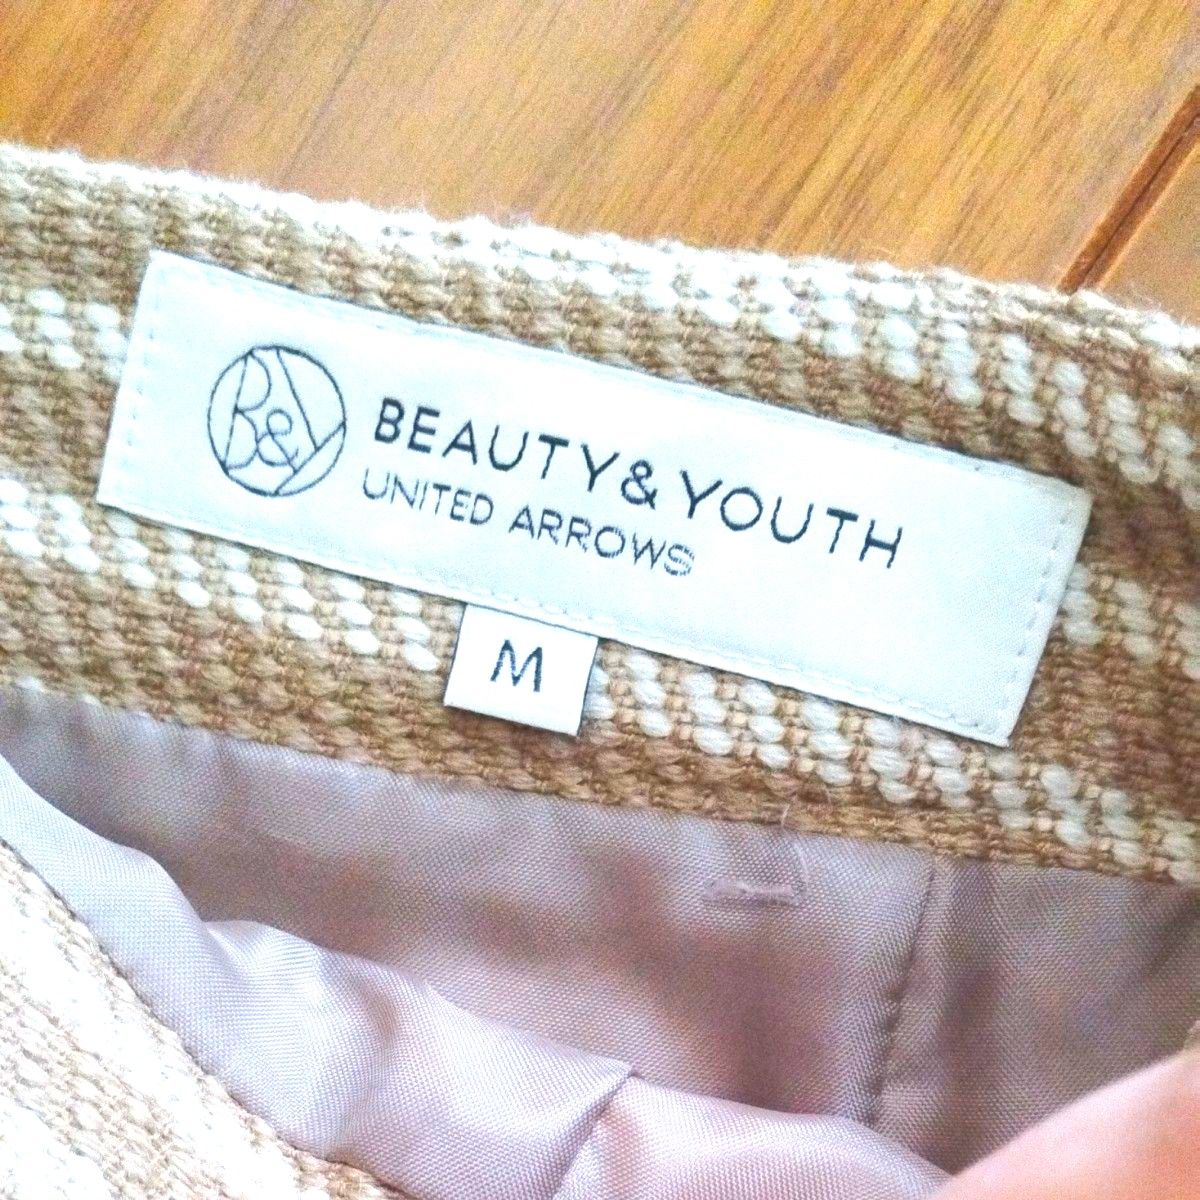 BEAUTY＆YOUTH UNITED ARROWS ボーダータイトスカート